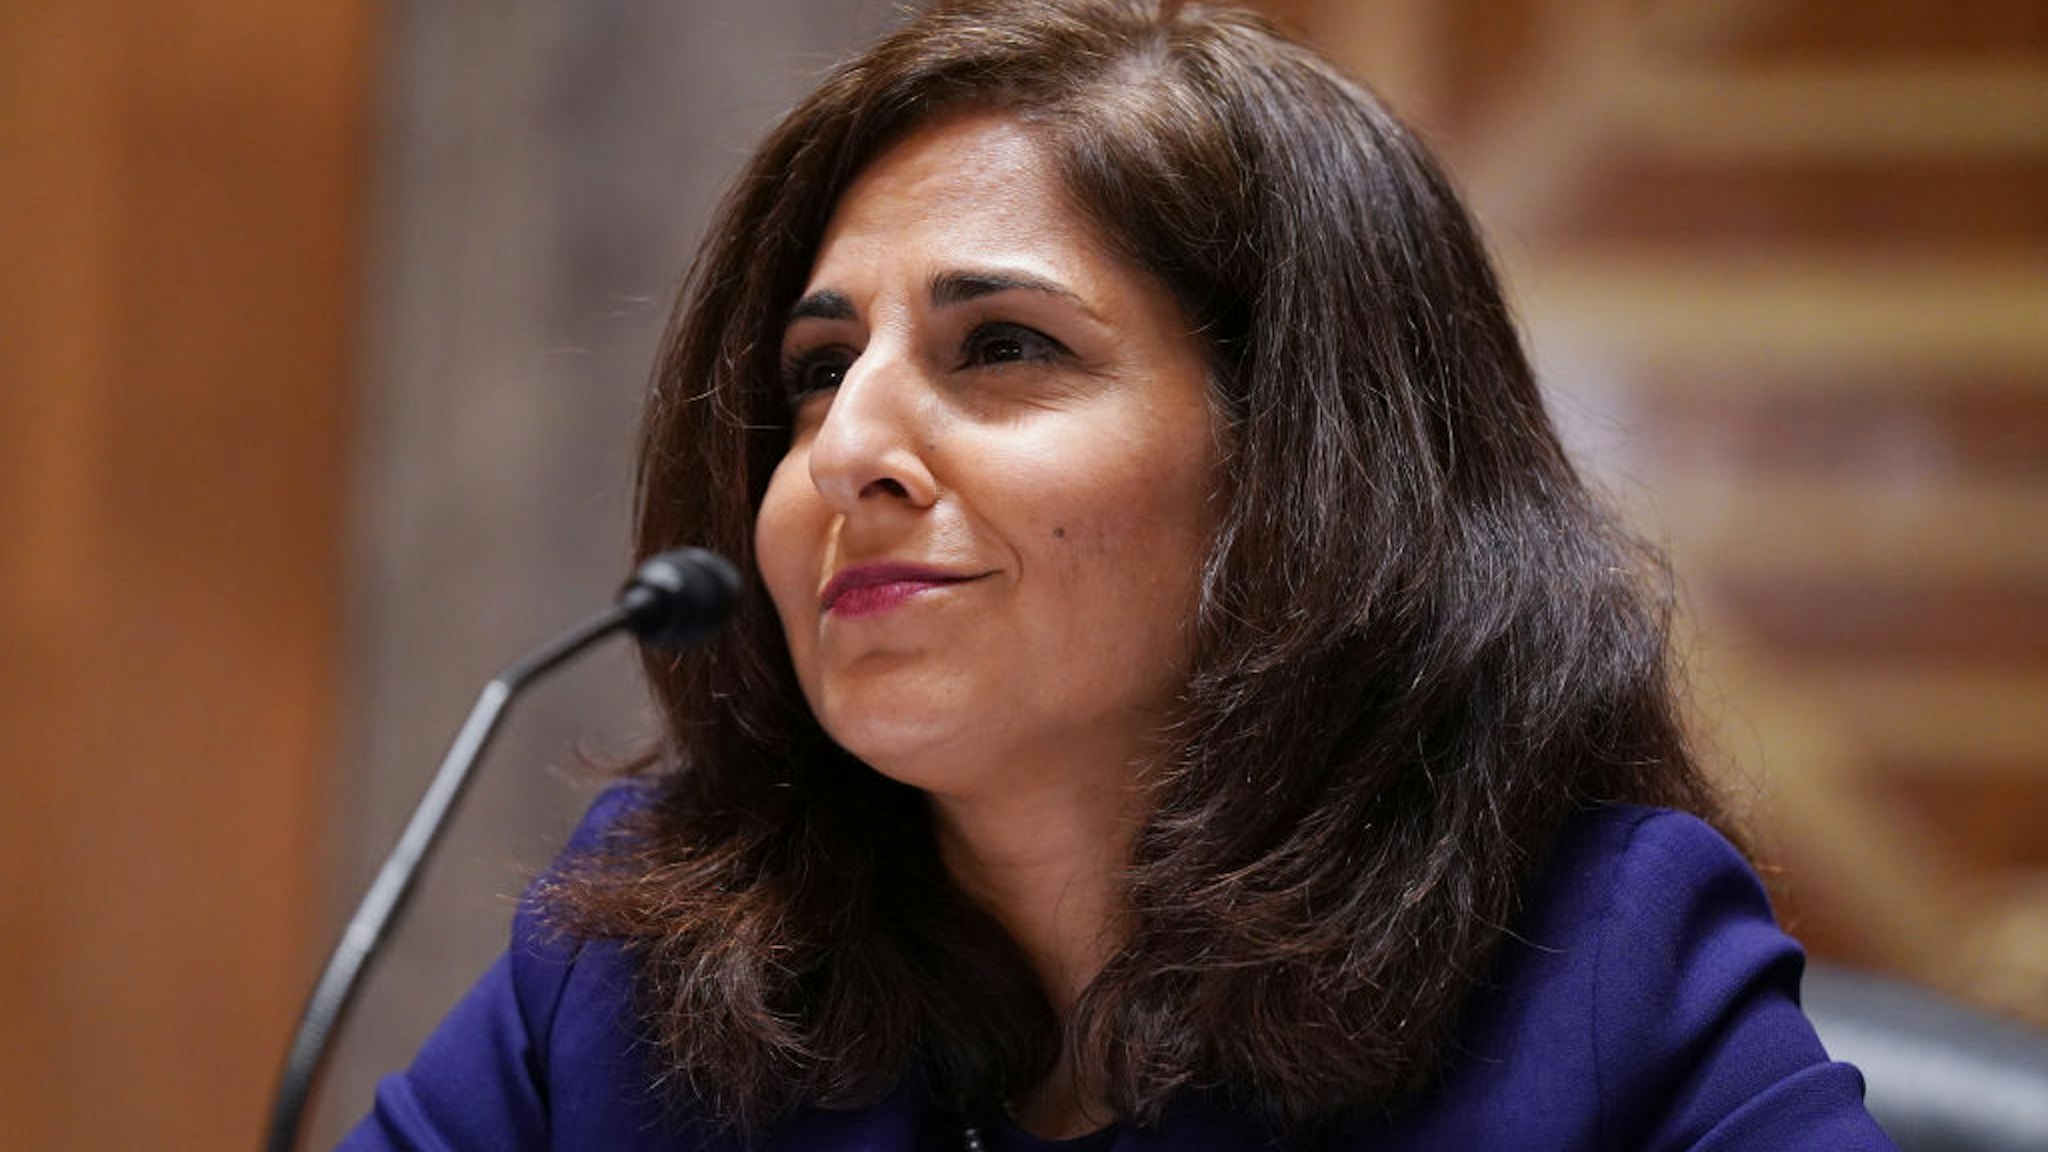 Neera Tanden, director of the Office and Management and Budget (OMB) nominee for U.S. President Joe Biden, speaks during a Senate Homeland Security and Governmental Affairs Committee confirmation hearing in Washington, D.C., U.S., on Tuesday, Feb. 9, 2021. Tanden, who pledged to work with both parties after drawing sharp criticism from Republicans for sniping at them on social media, worked on the Affordable Care Act during the Obama years and was an aide to Hillary Clinton from her time as first lady.